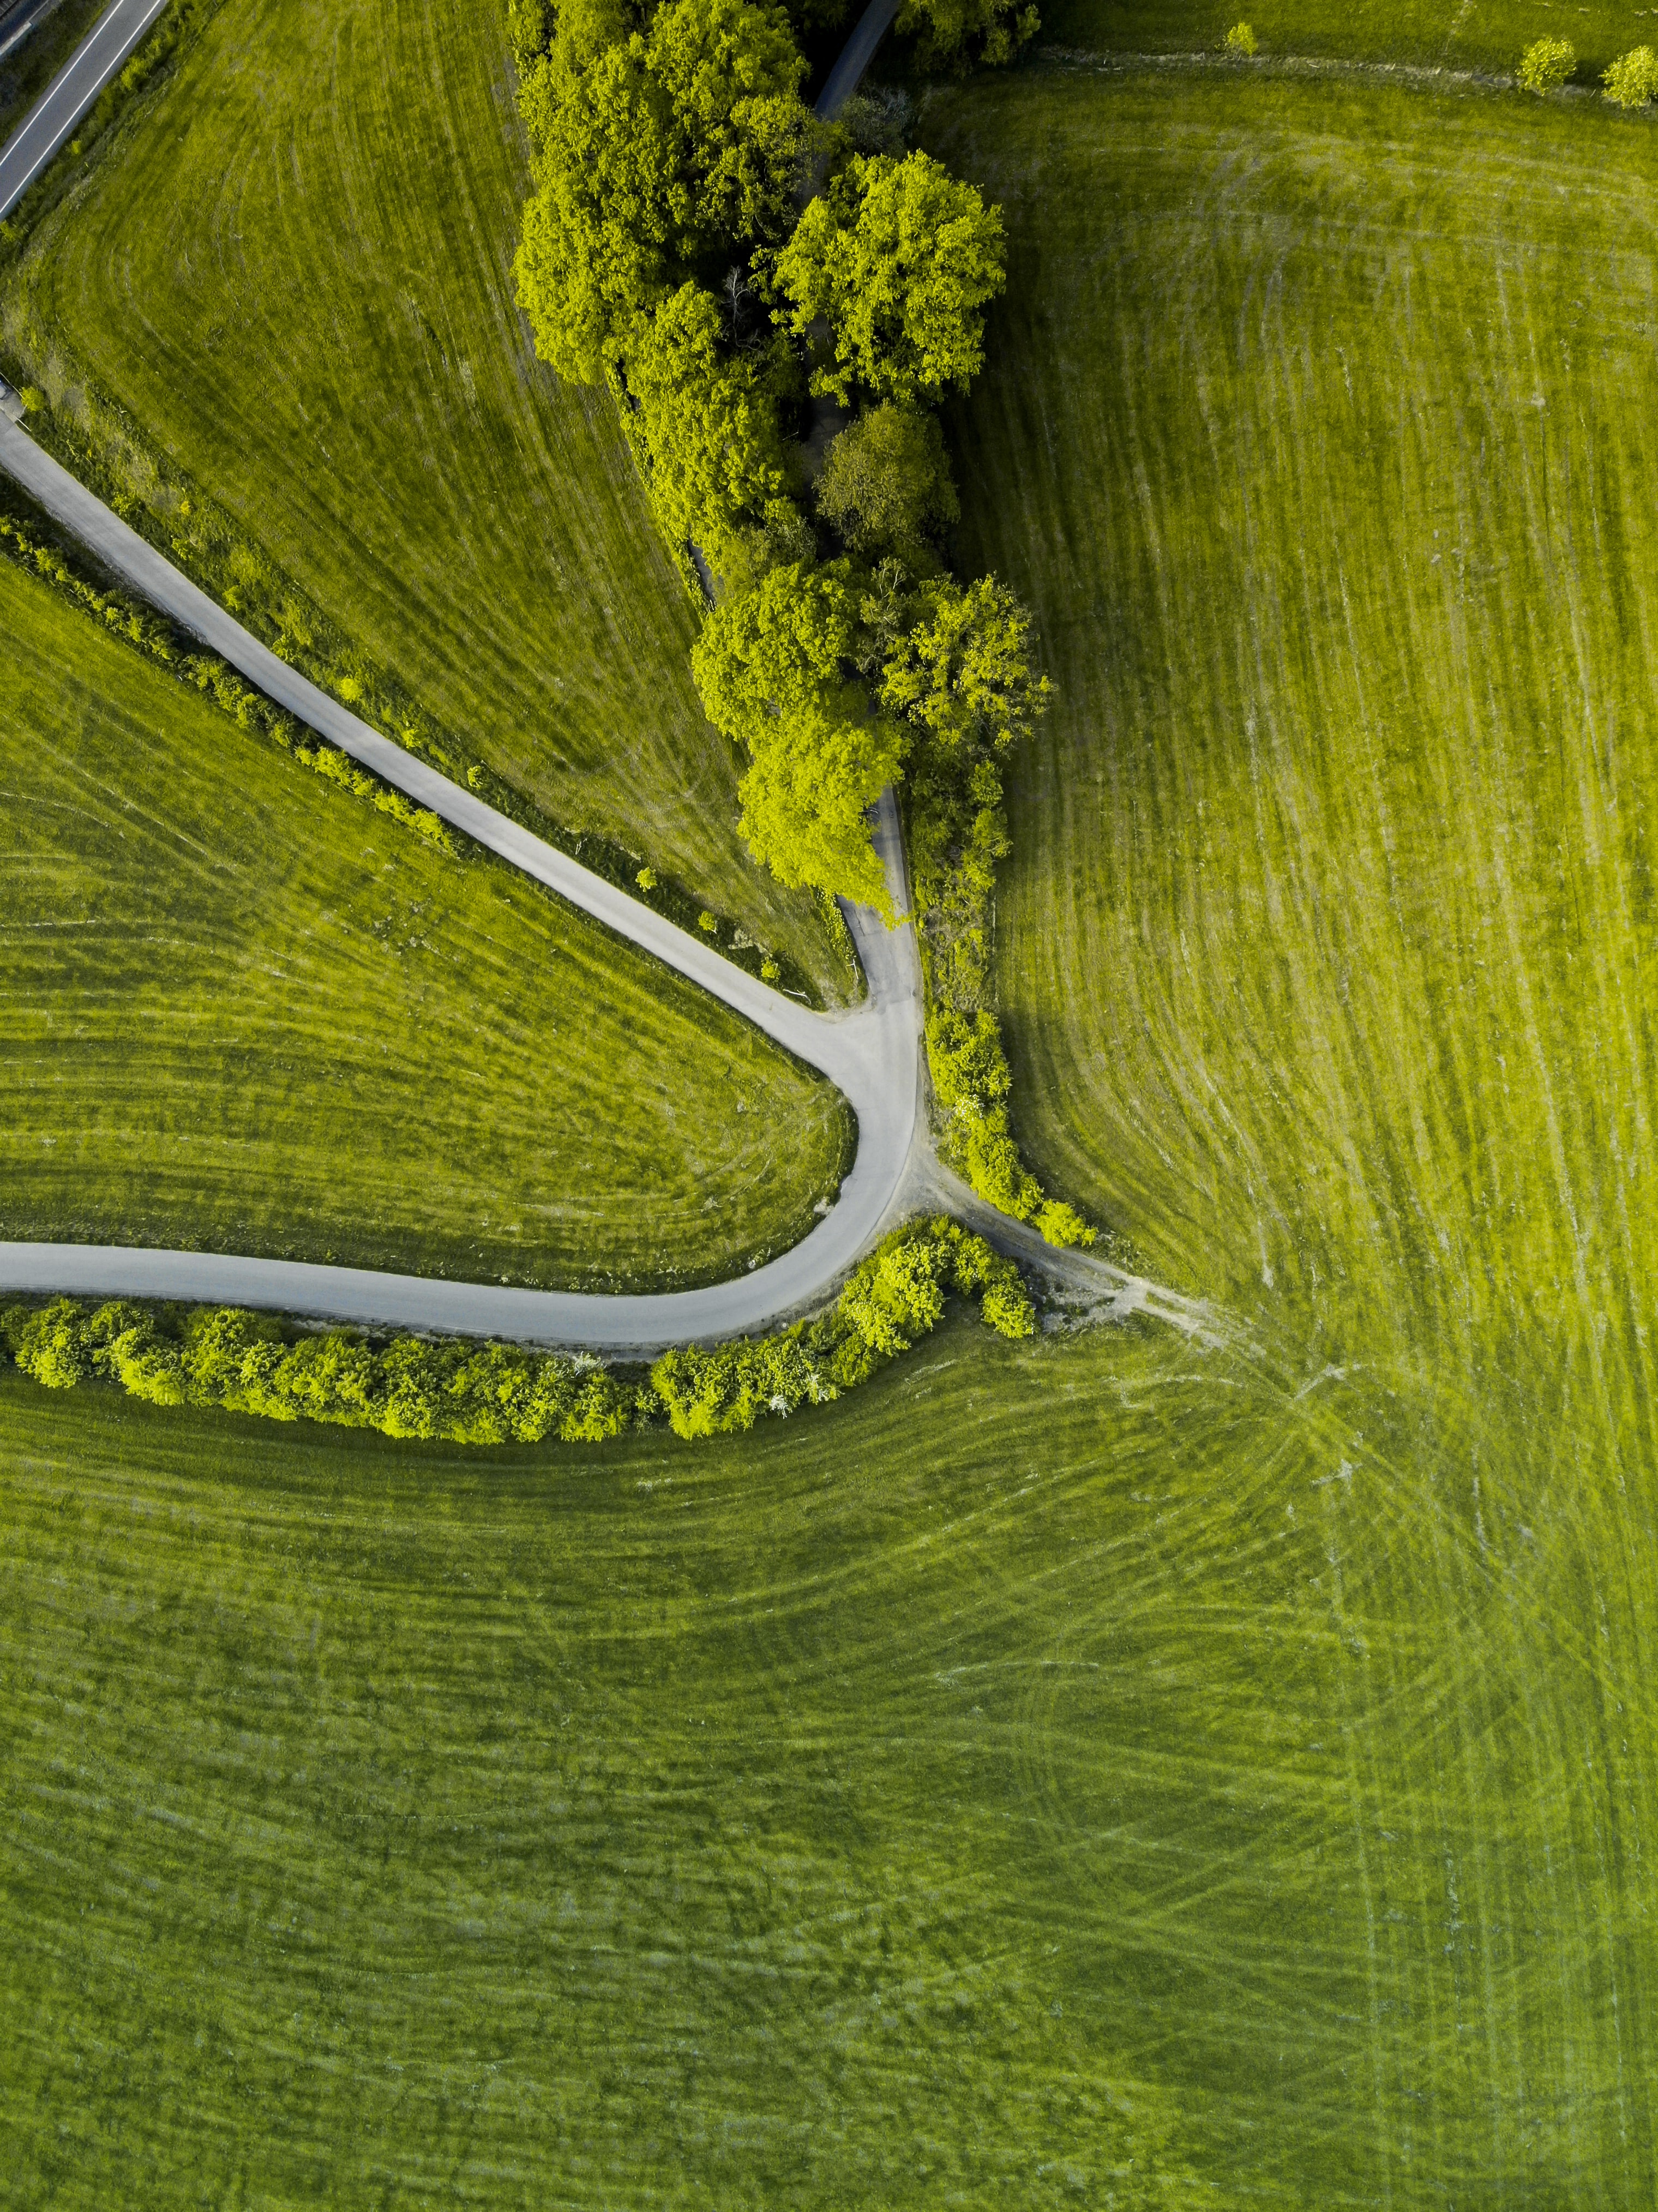 nature, trees, grass, view from above, road, winding, sinuous High Definition image